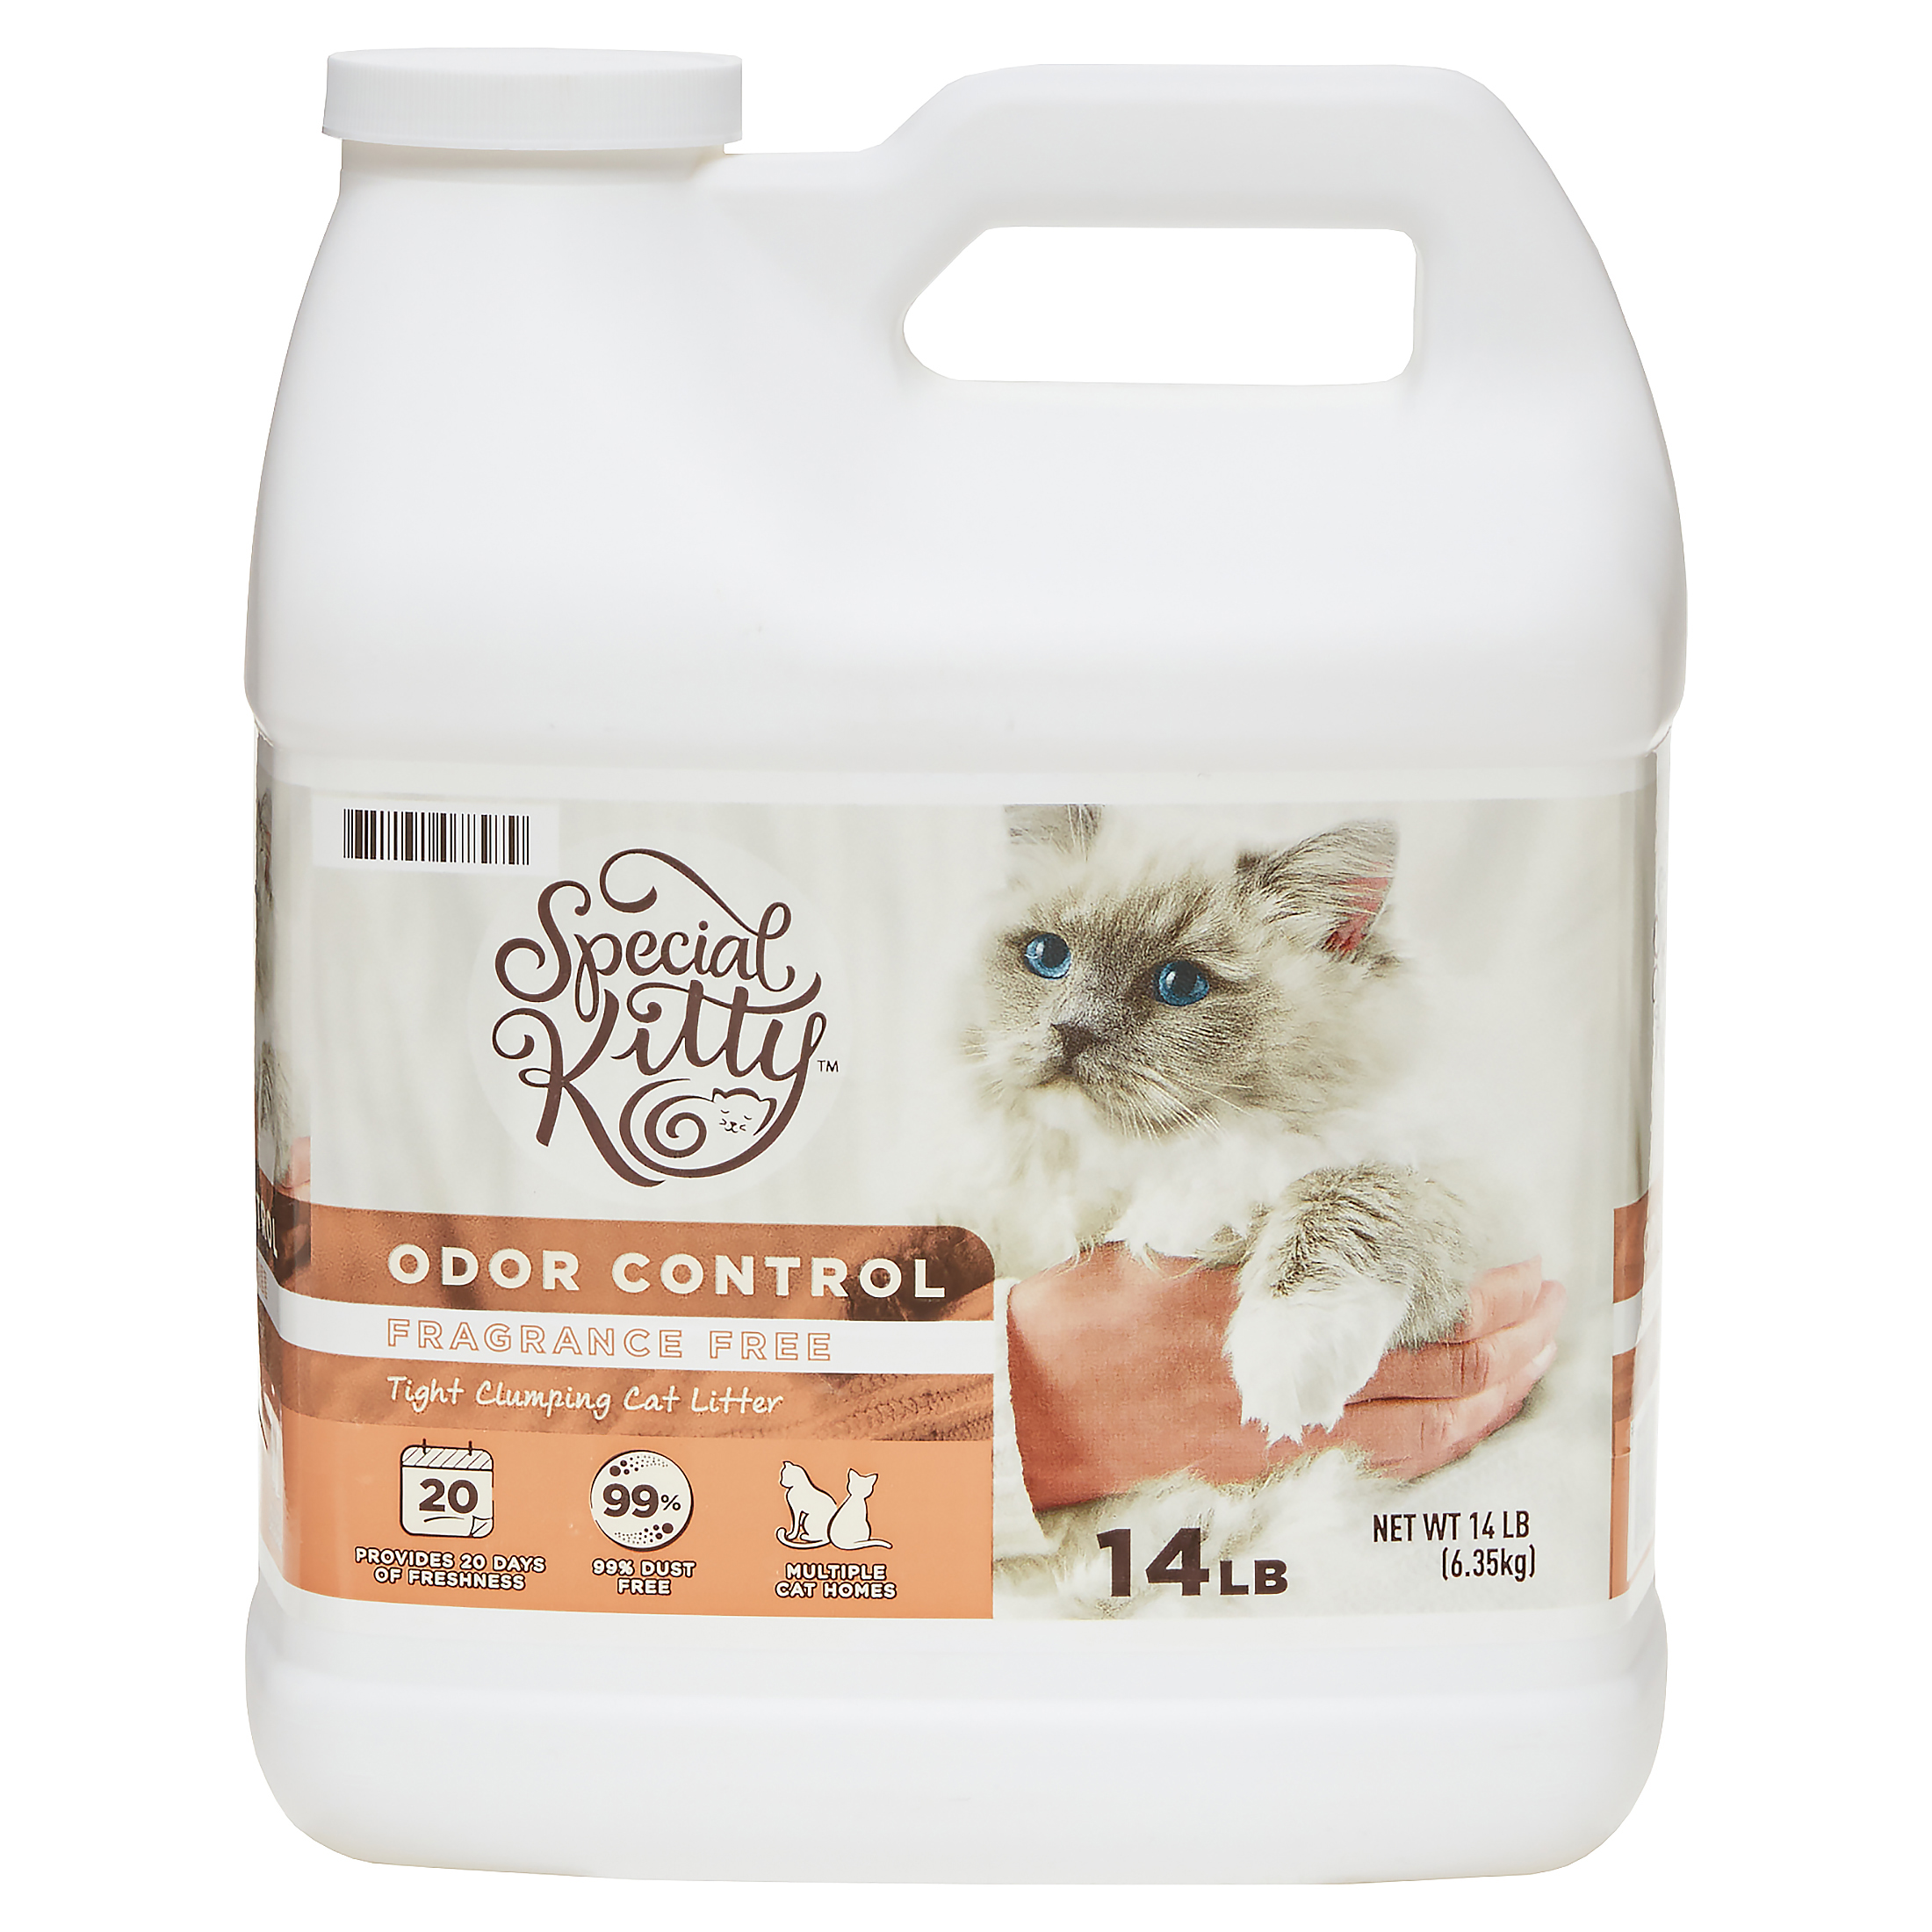 Special Kitty Odor Control Tight Clumping Cat Litter, Fragrance Free, 14 lb - image 1 of 7